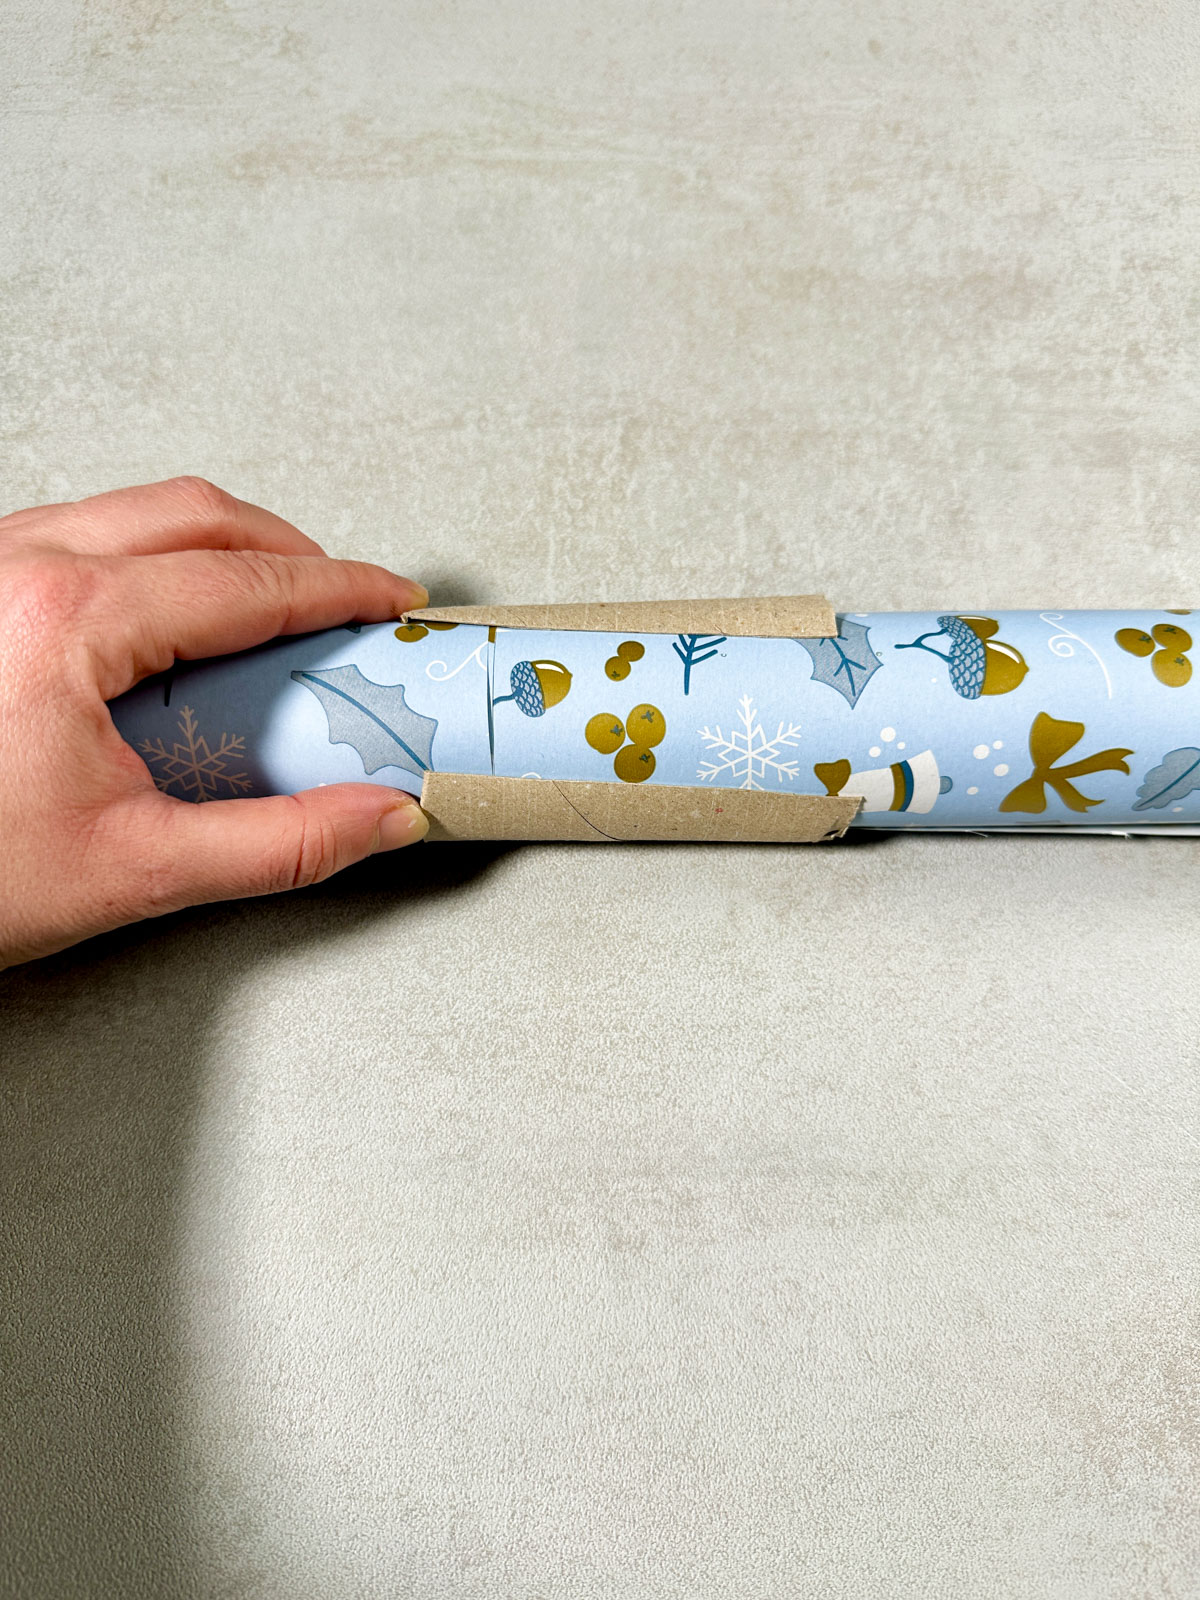 Use a Toilet Paper Roll to Store Wrapping Paper